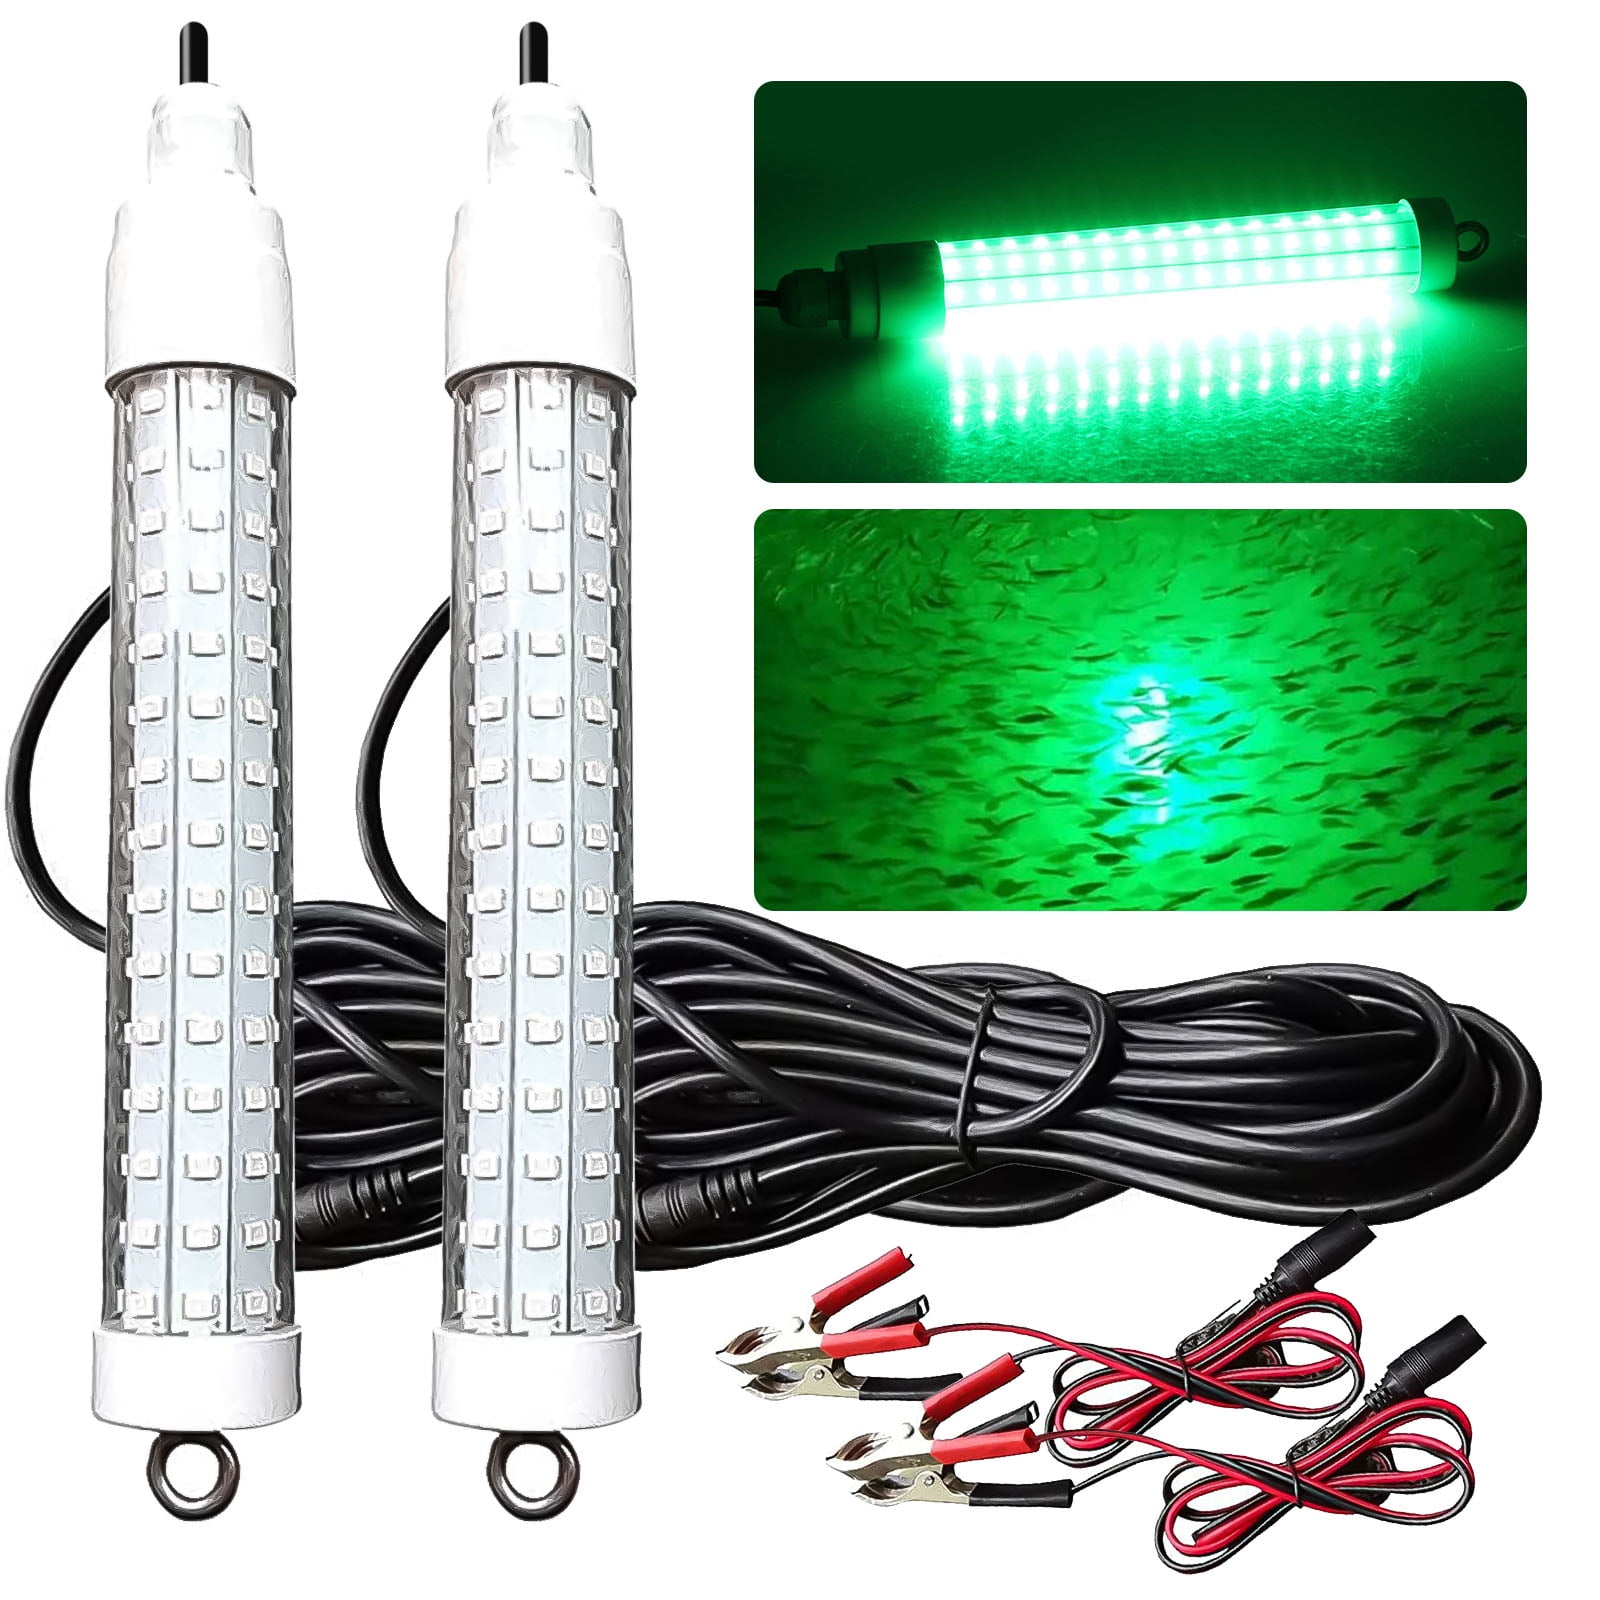 LL LED 10W Submersible Night Fishing Light 12V Underwater Fish Finder Lamp  Attracts Prawns @MY